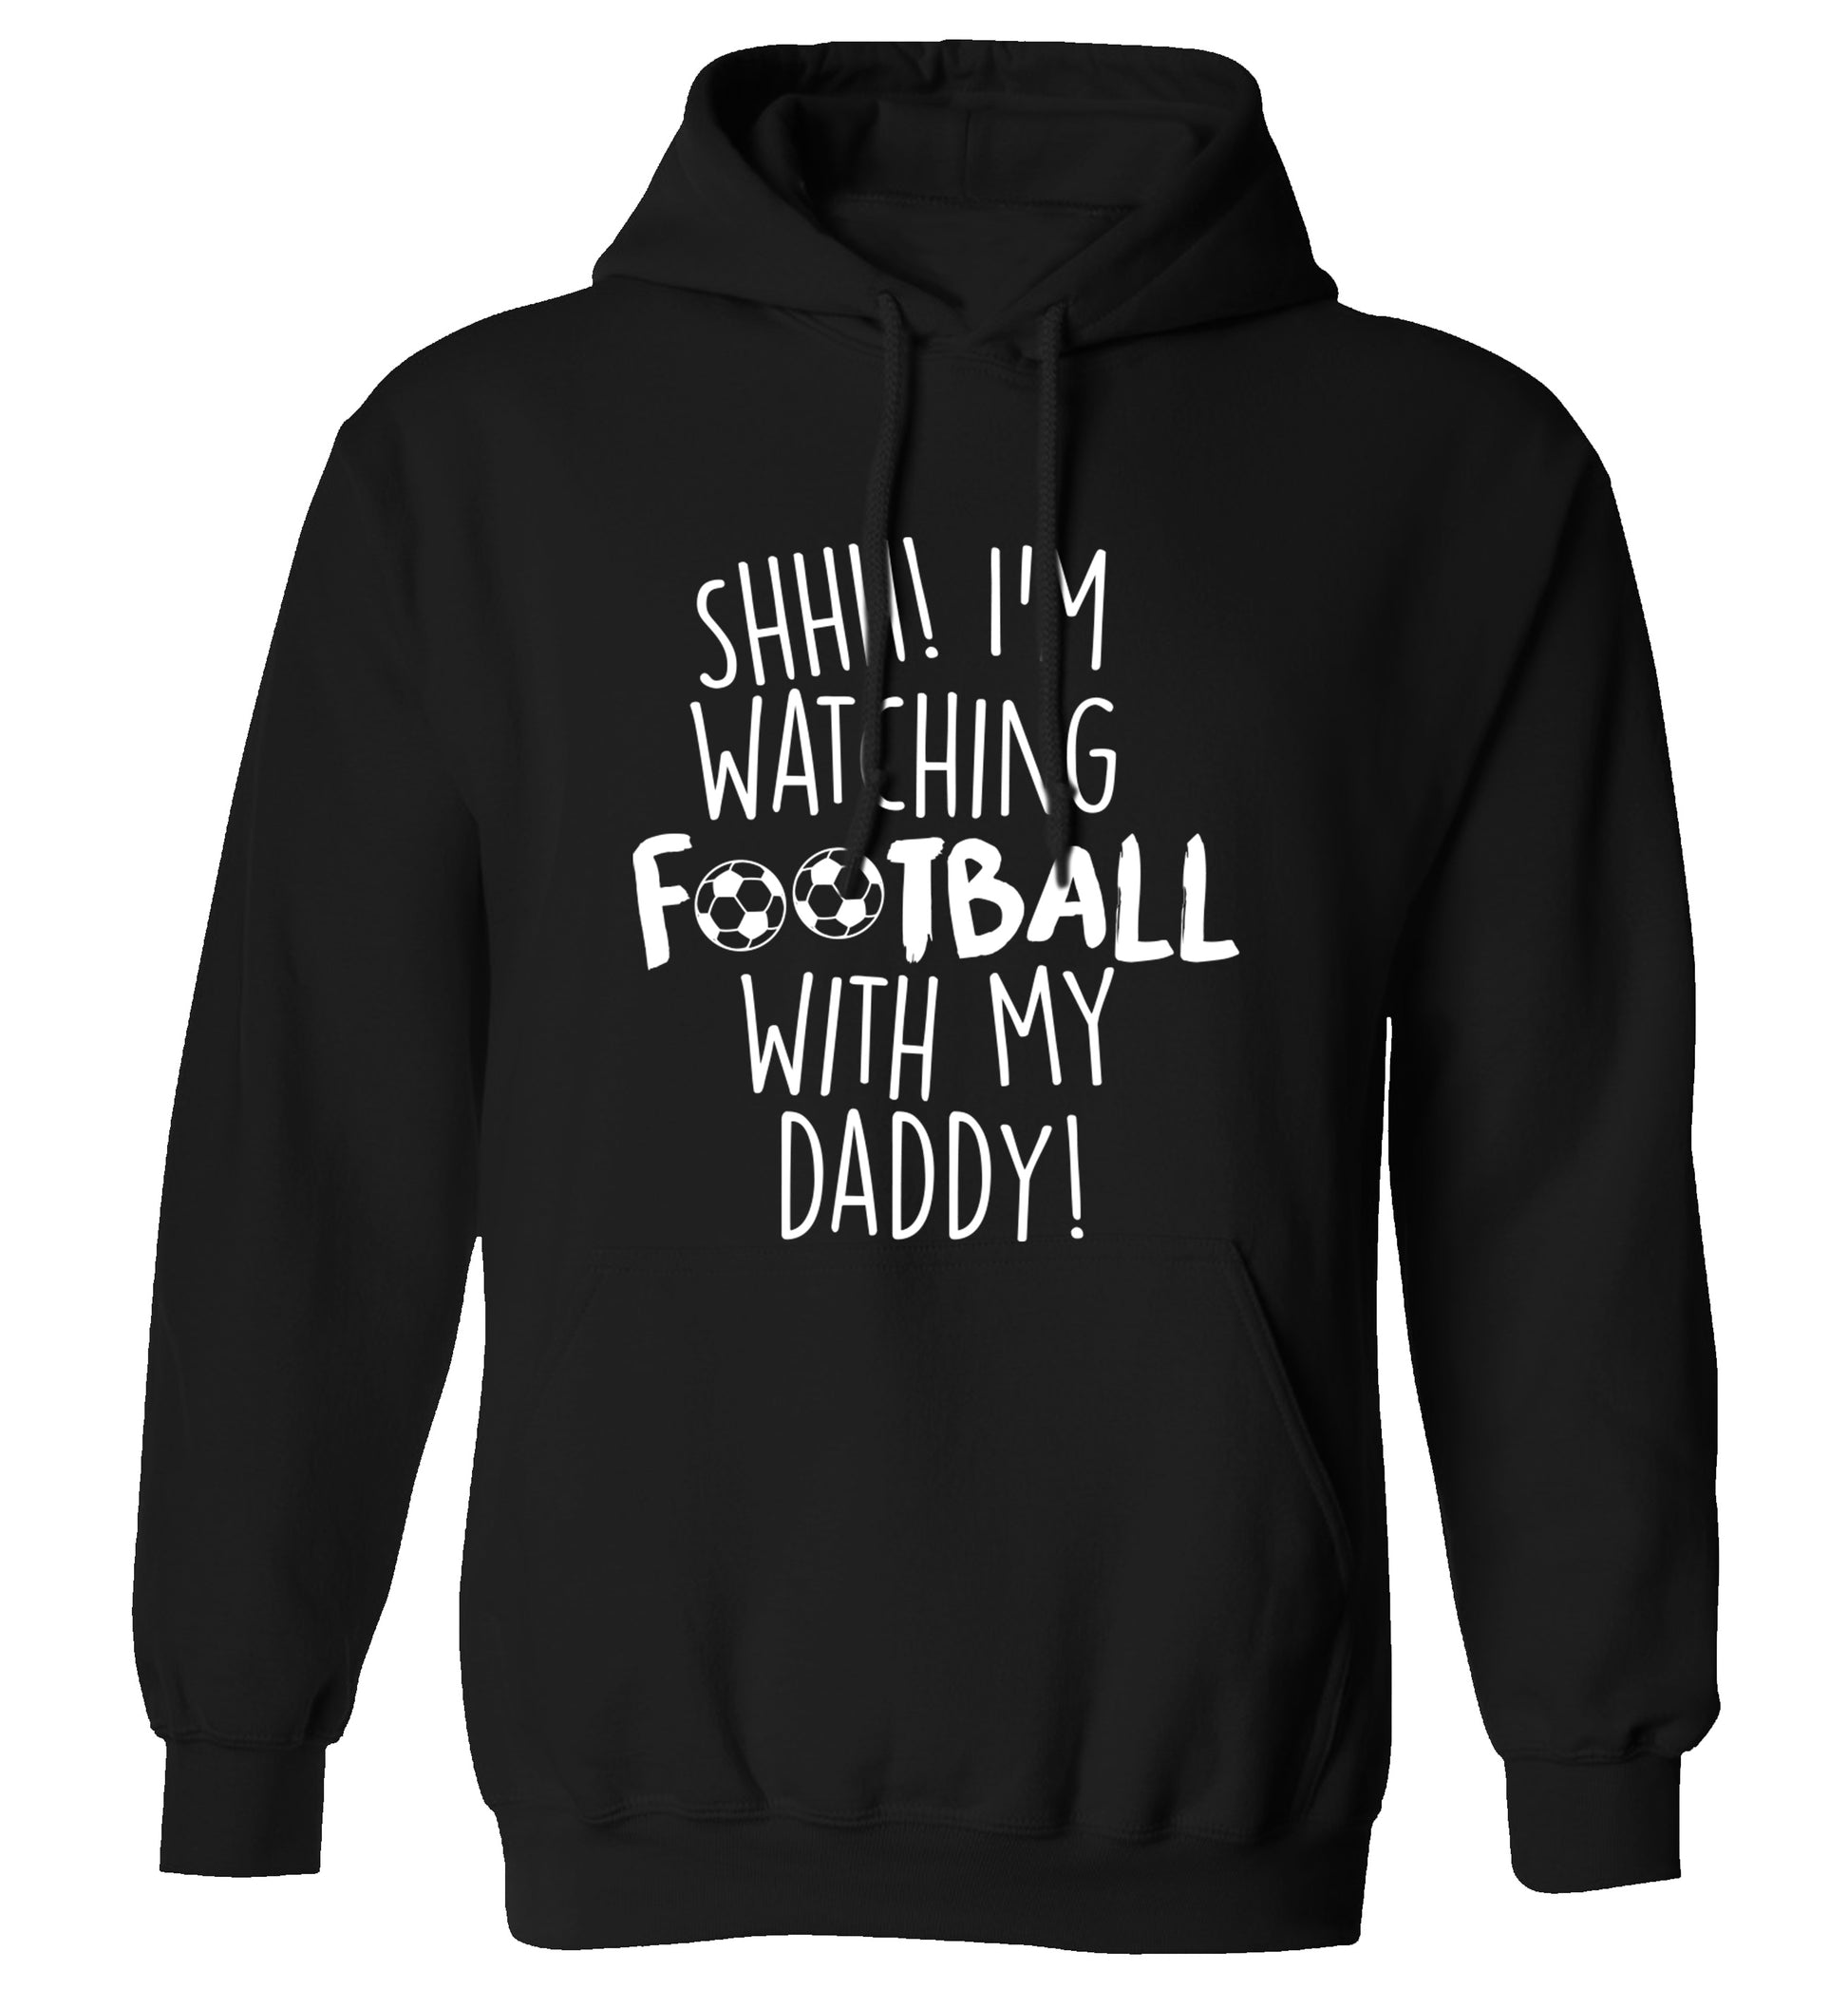 Shhh I'm watching football with my daddy adults unisexblack hoodie 2XL